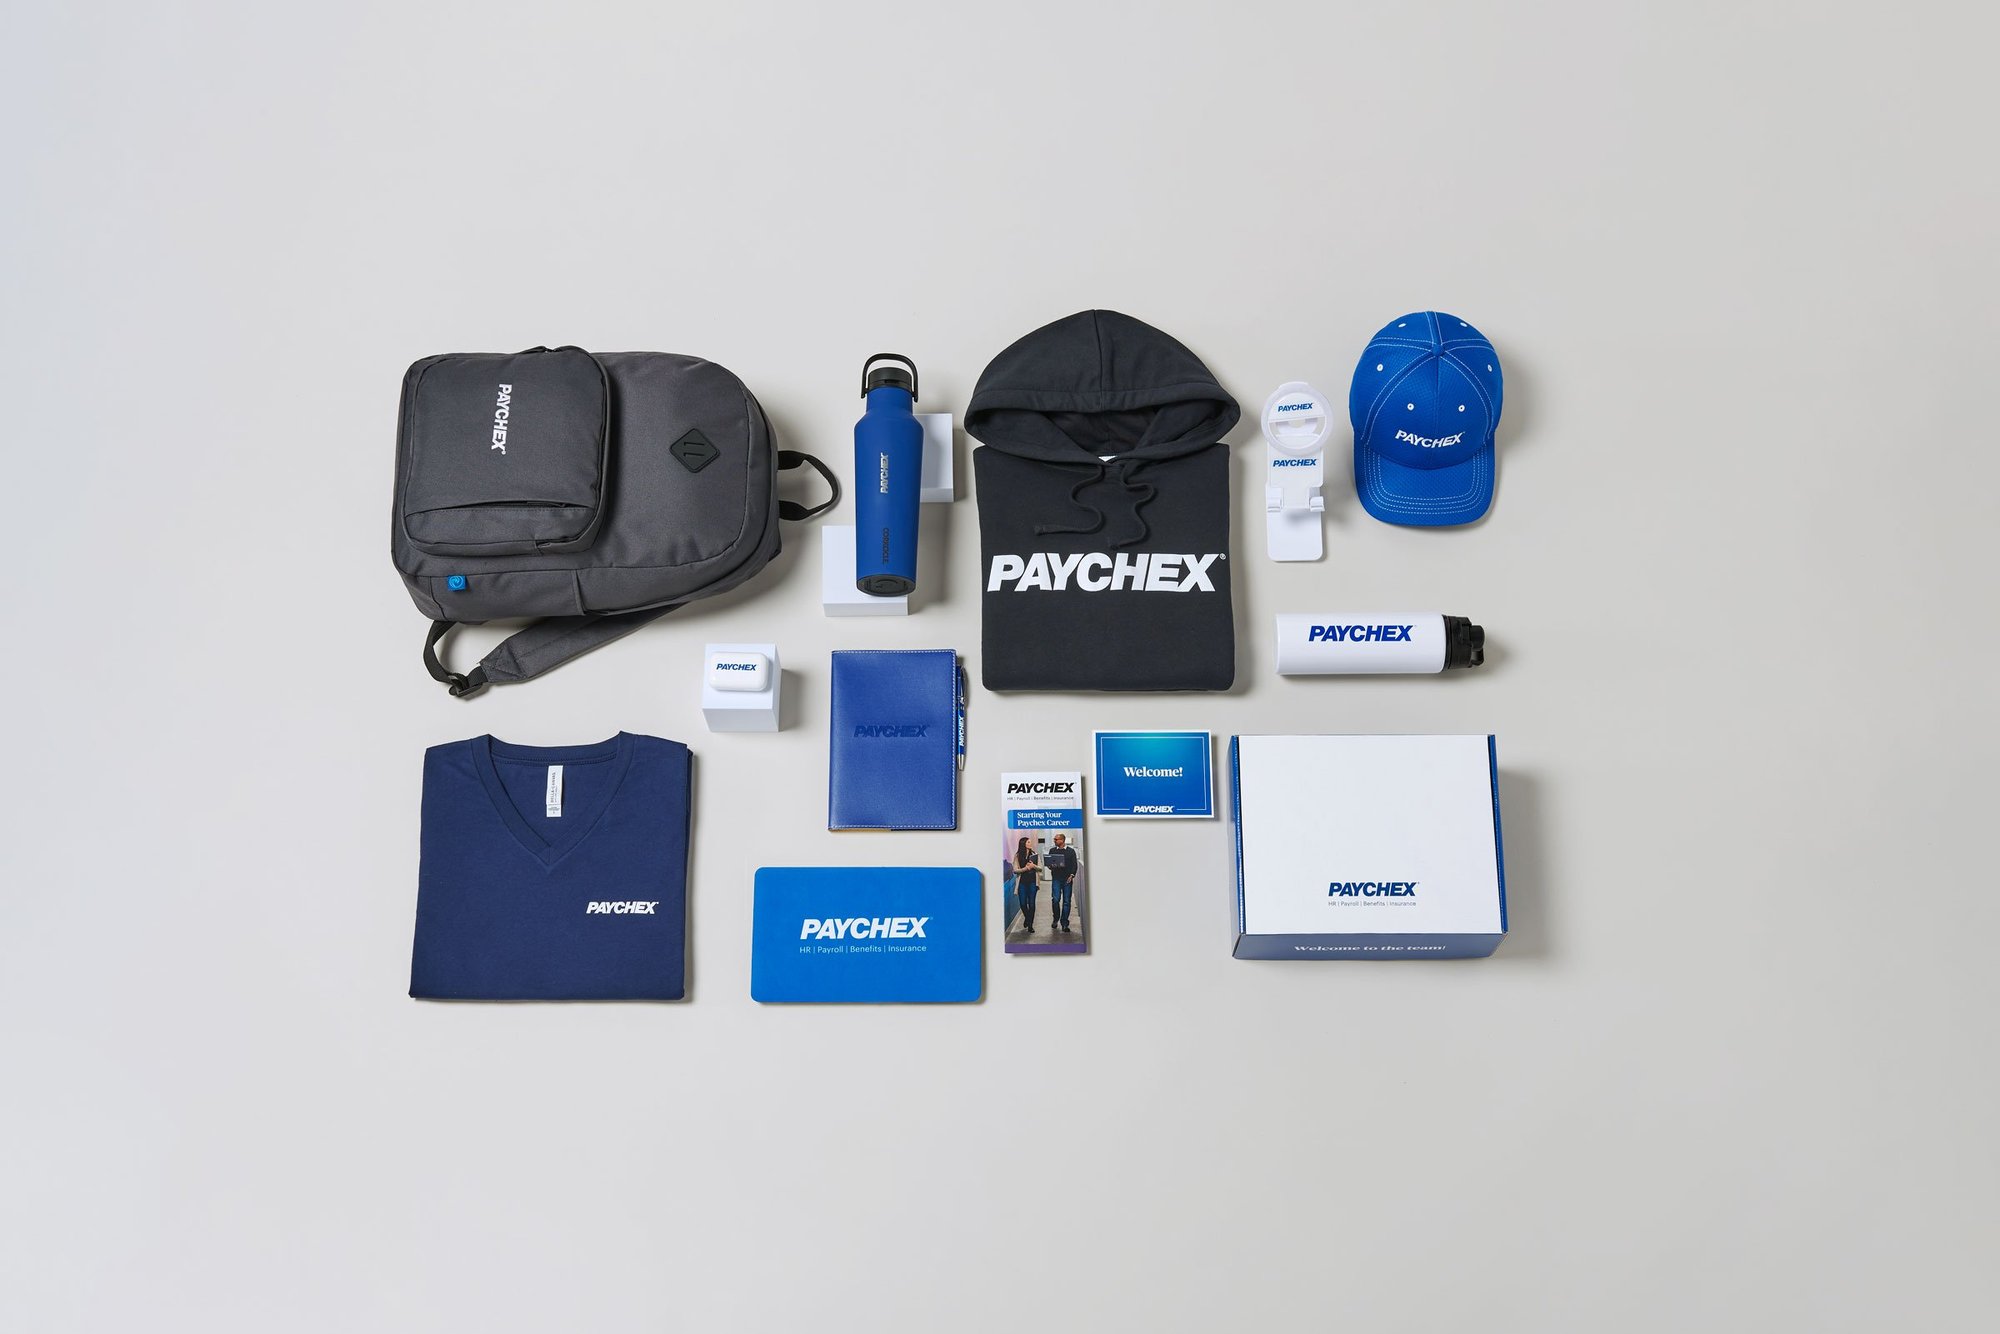 Paychex brandend book sack, shirts, bottles, hat and other merch.